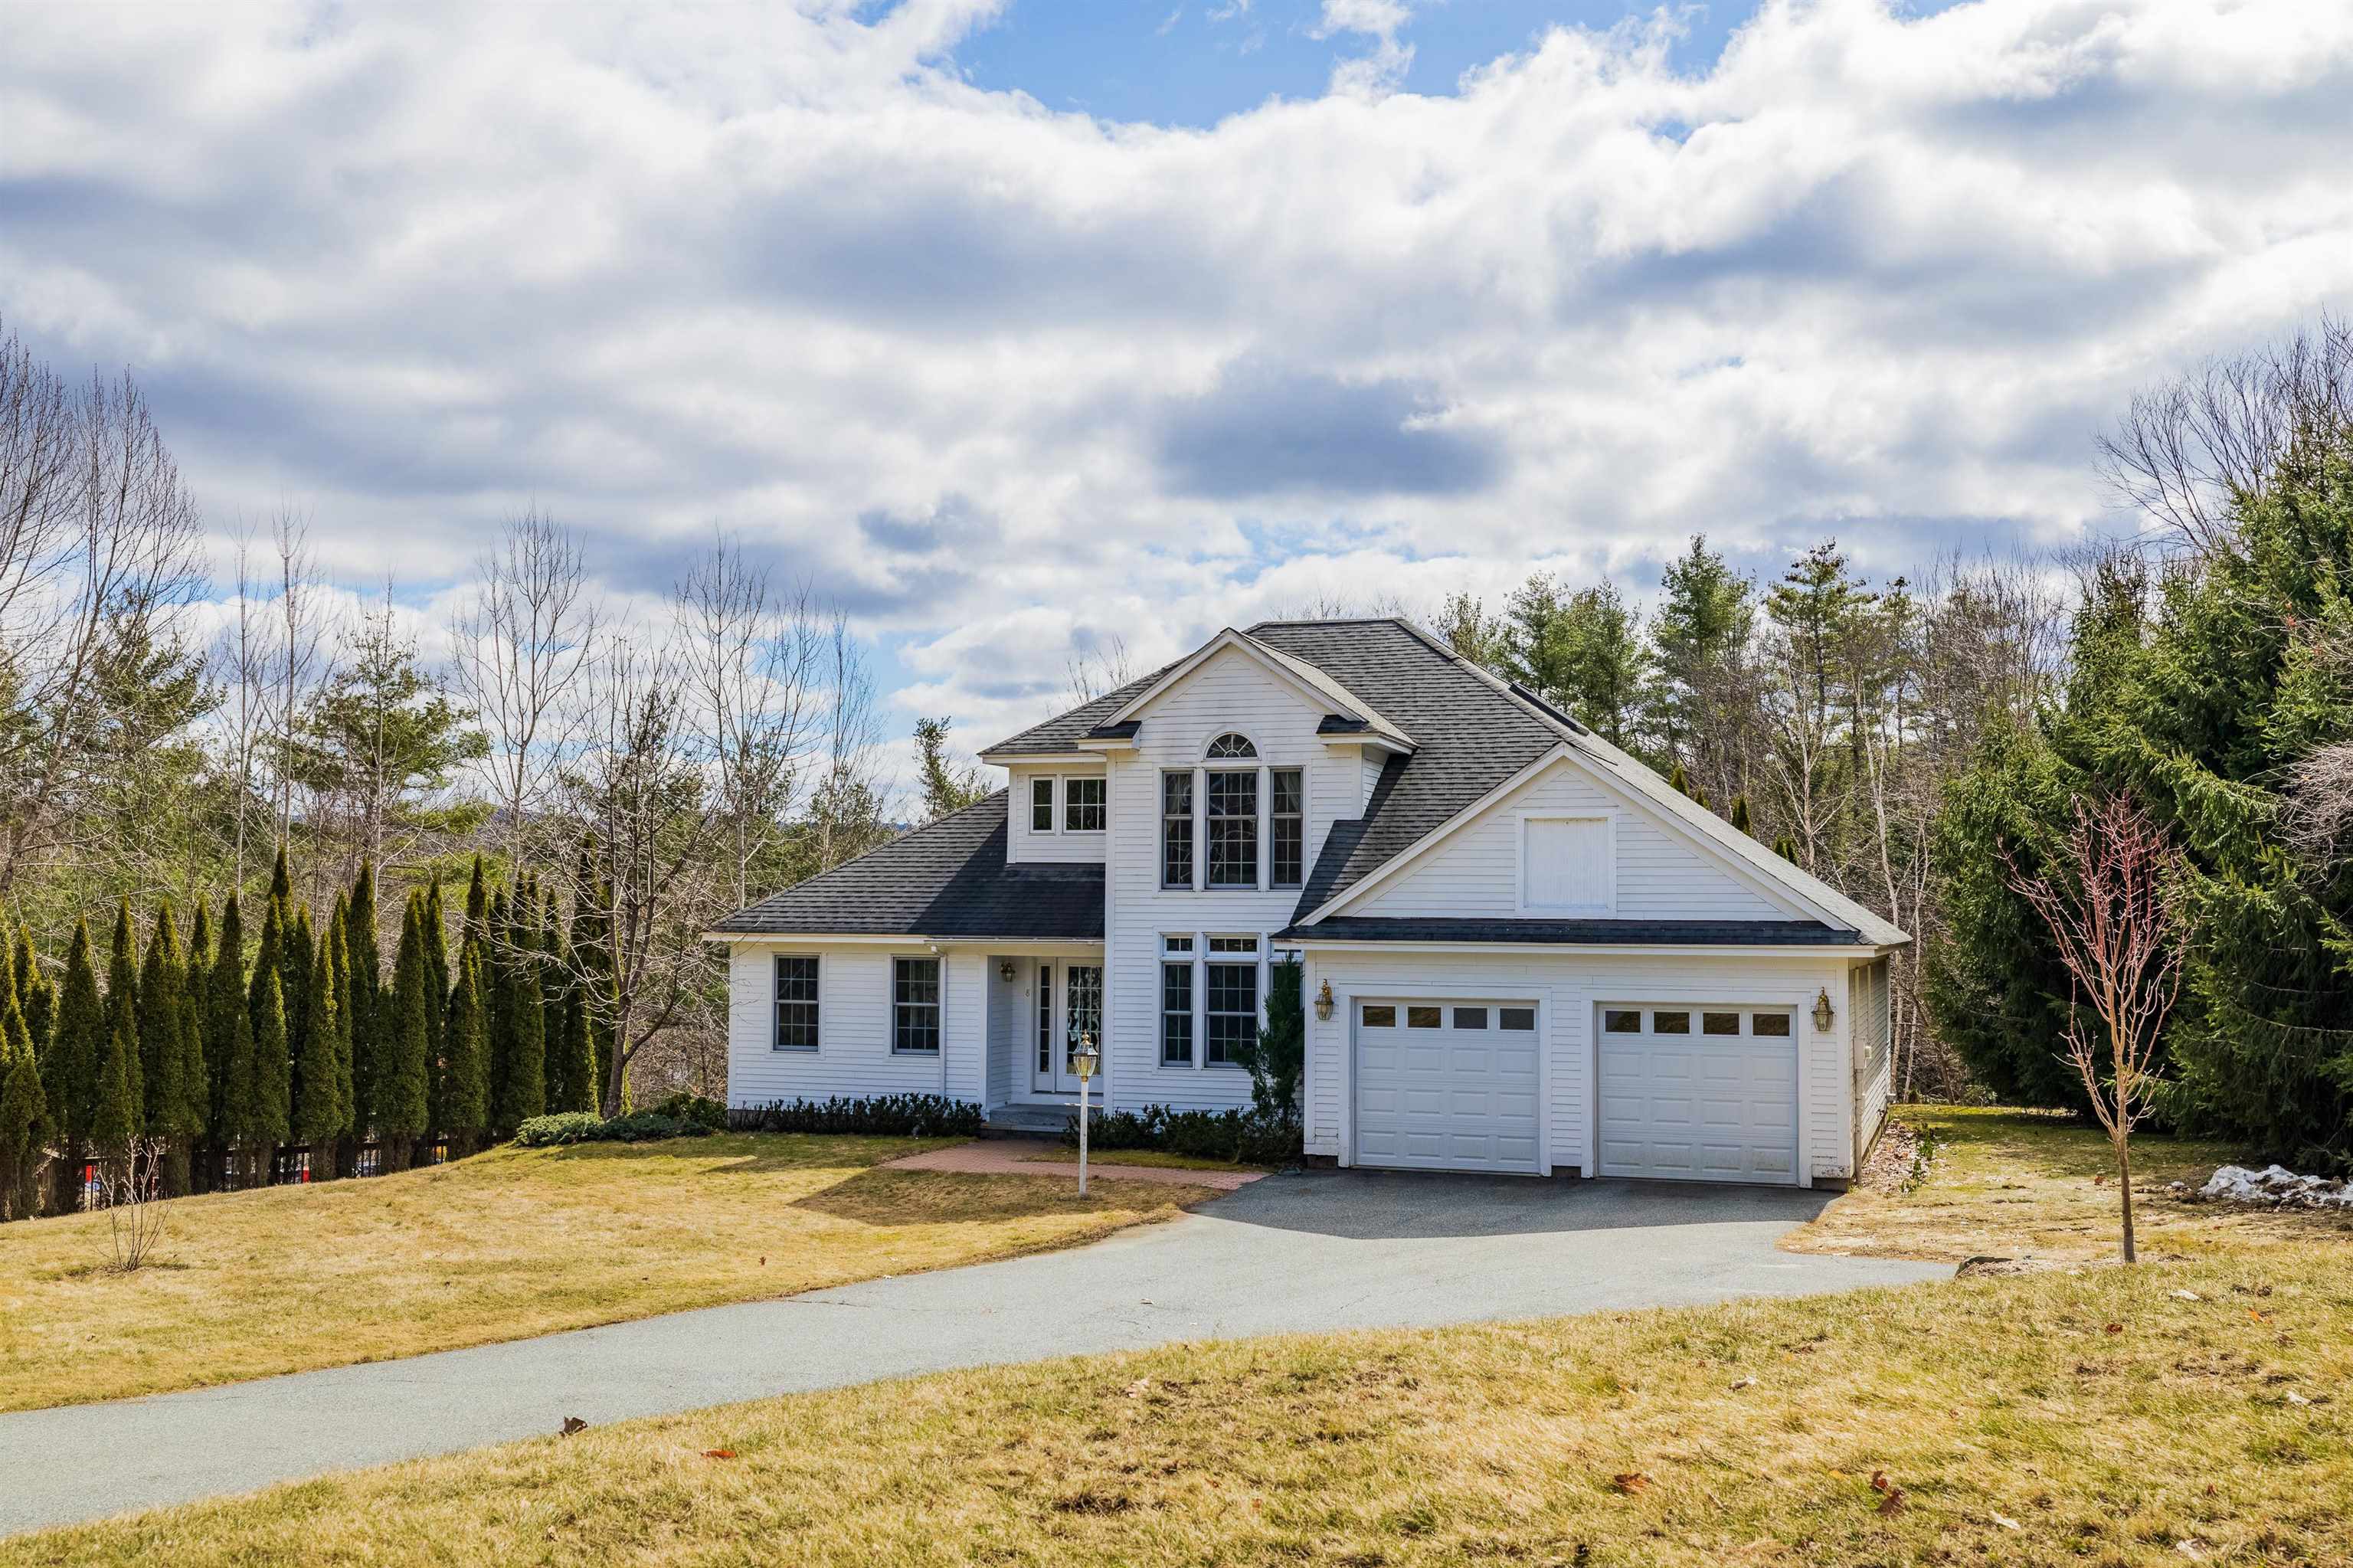 LEBANON NH Home for sale $$980,000 | $478 per sq.ft.